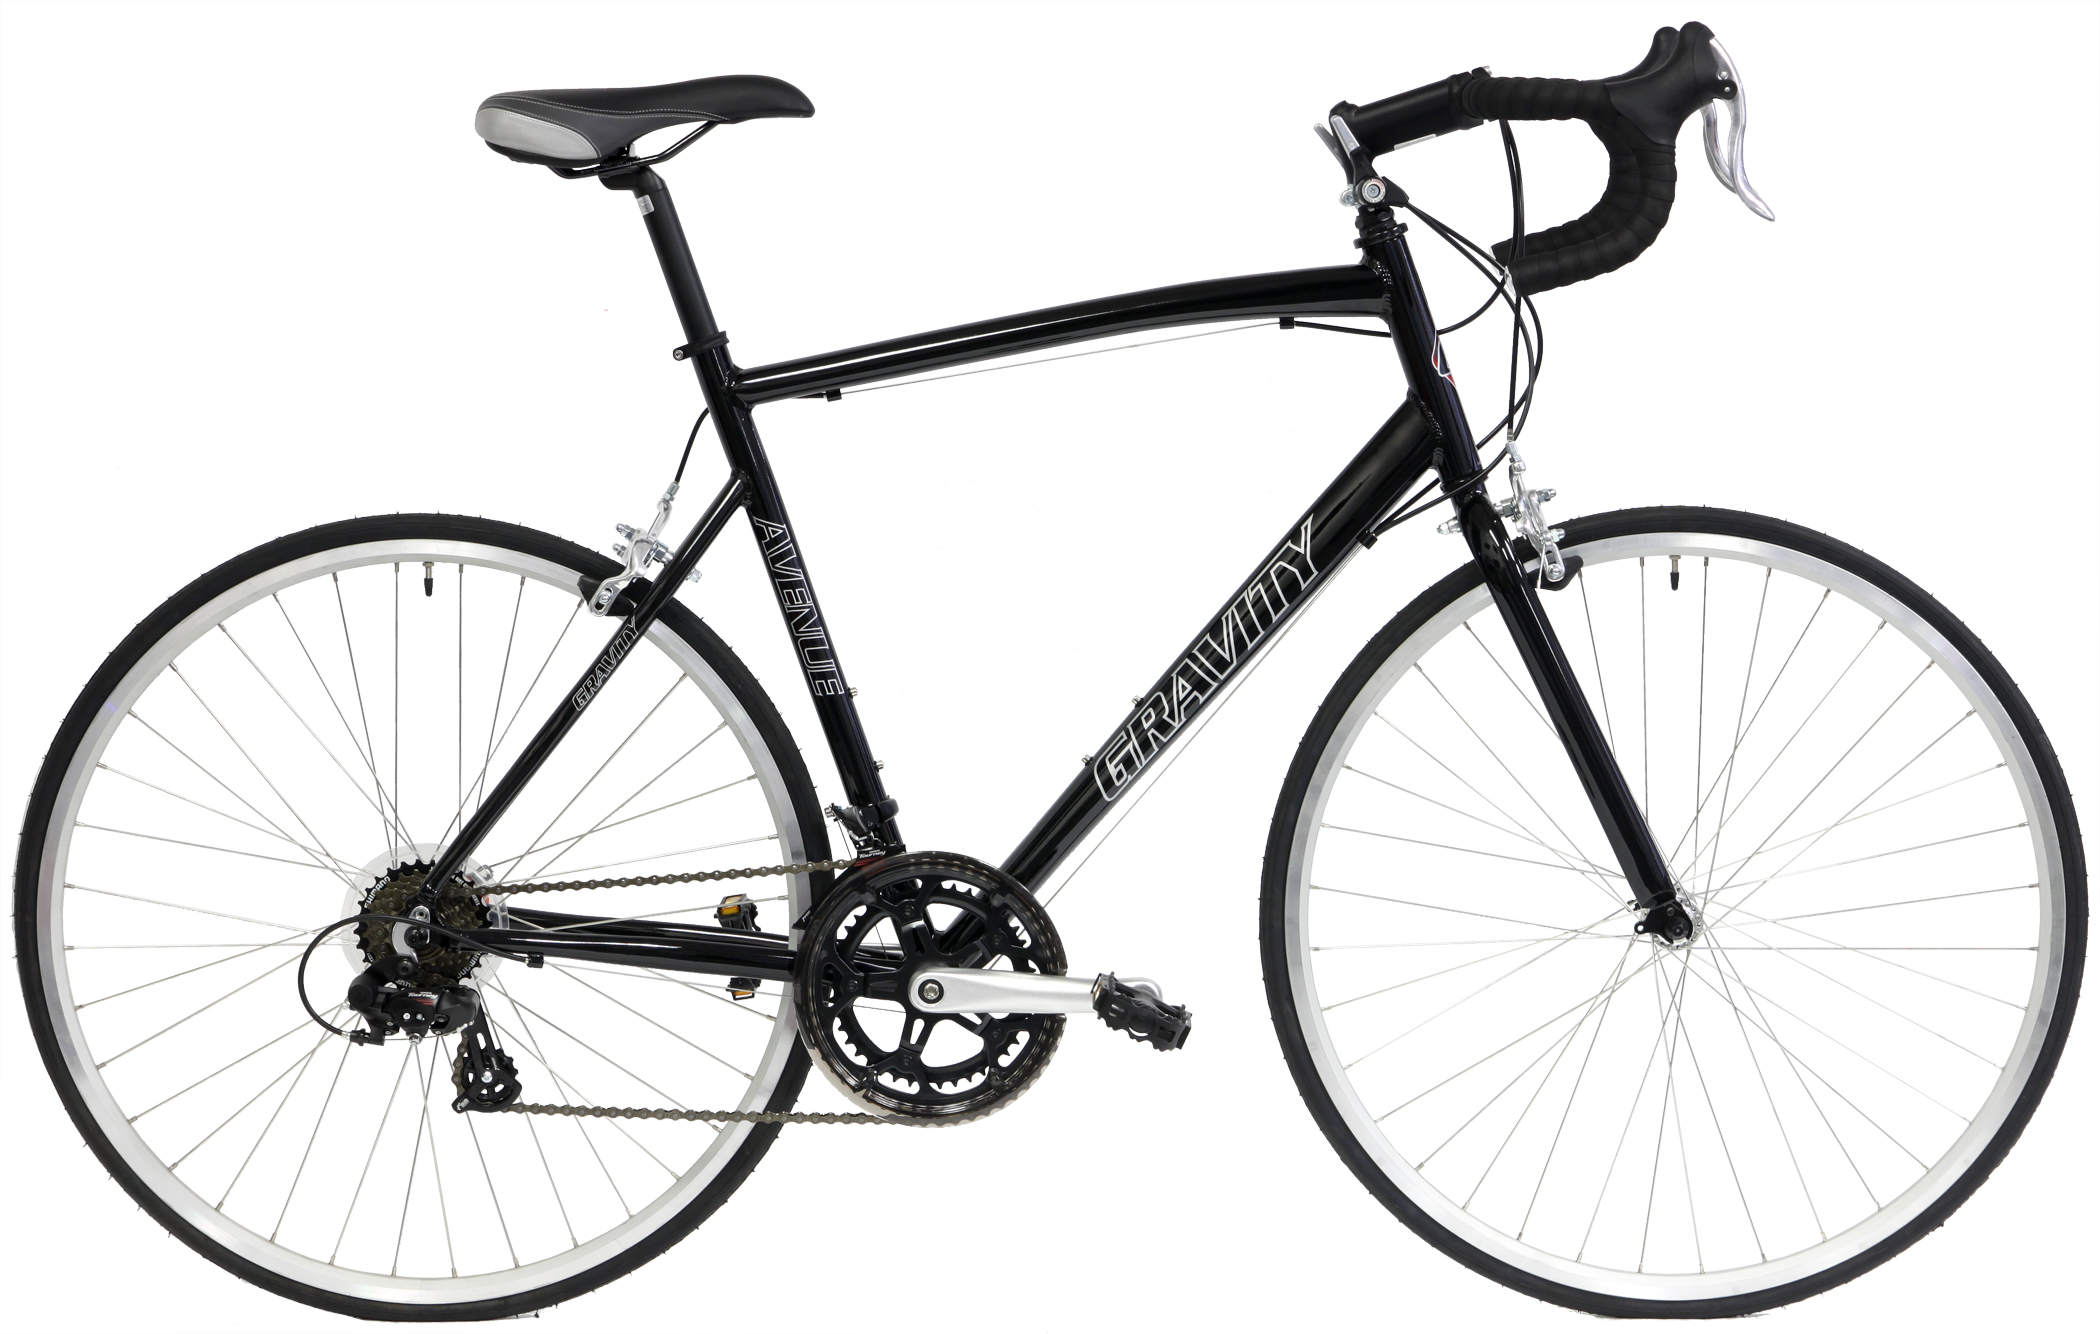 Save up to 60% off new Road Bikes - Gravity Avenue A | Save up to